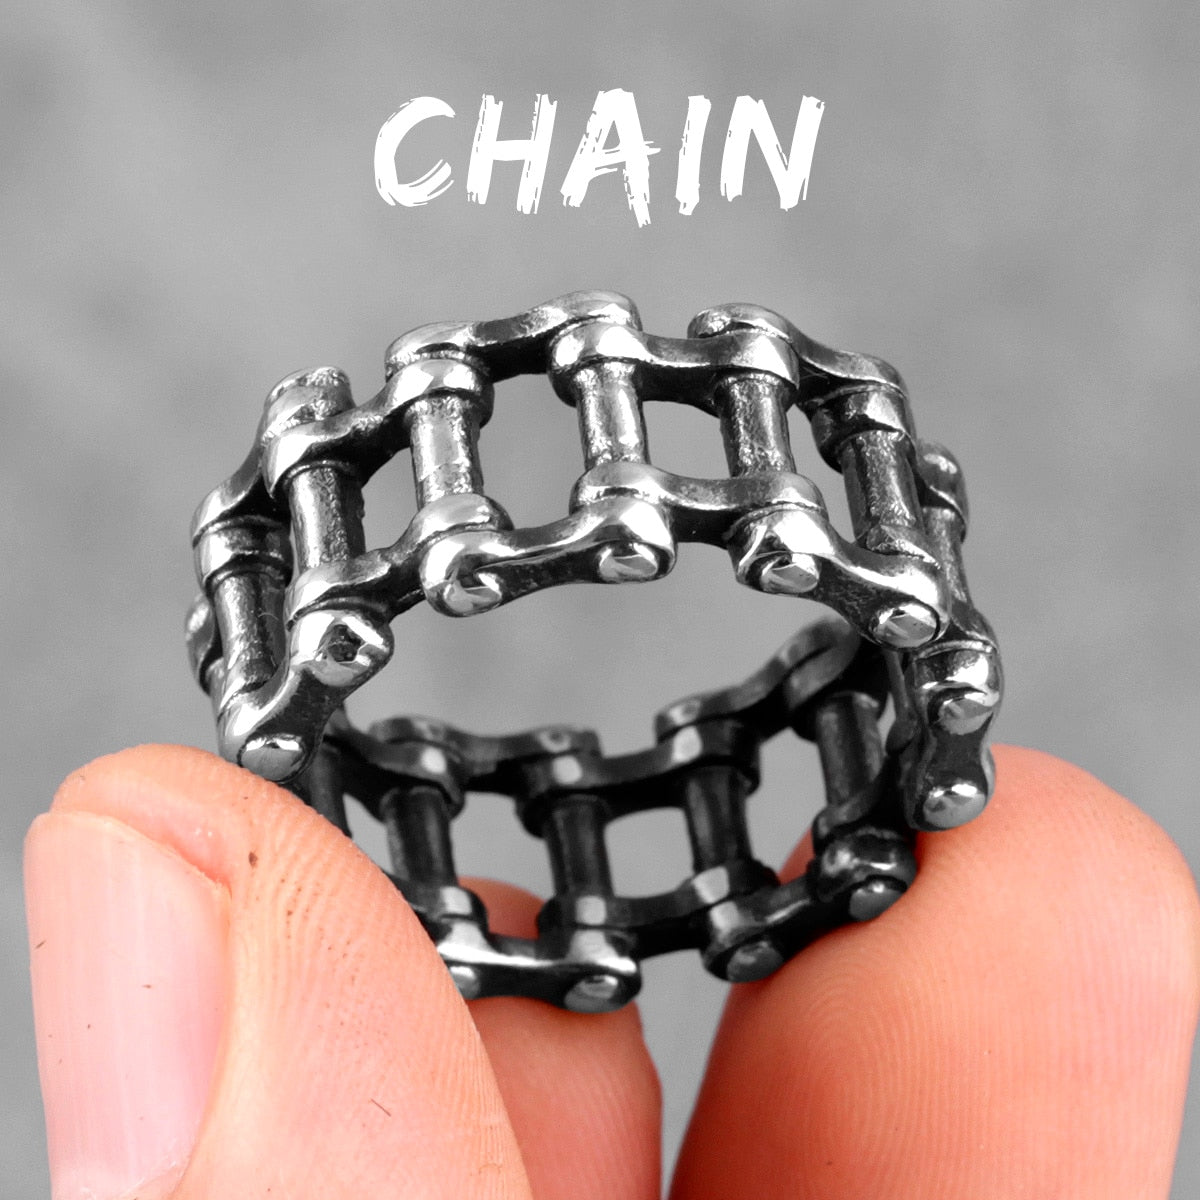 Industrial Style Mechanical Chain Stainless Steel Mens Rings Punk Hip Hop for Male Boy Biker Jewelry Creativity Gift R492-Chain